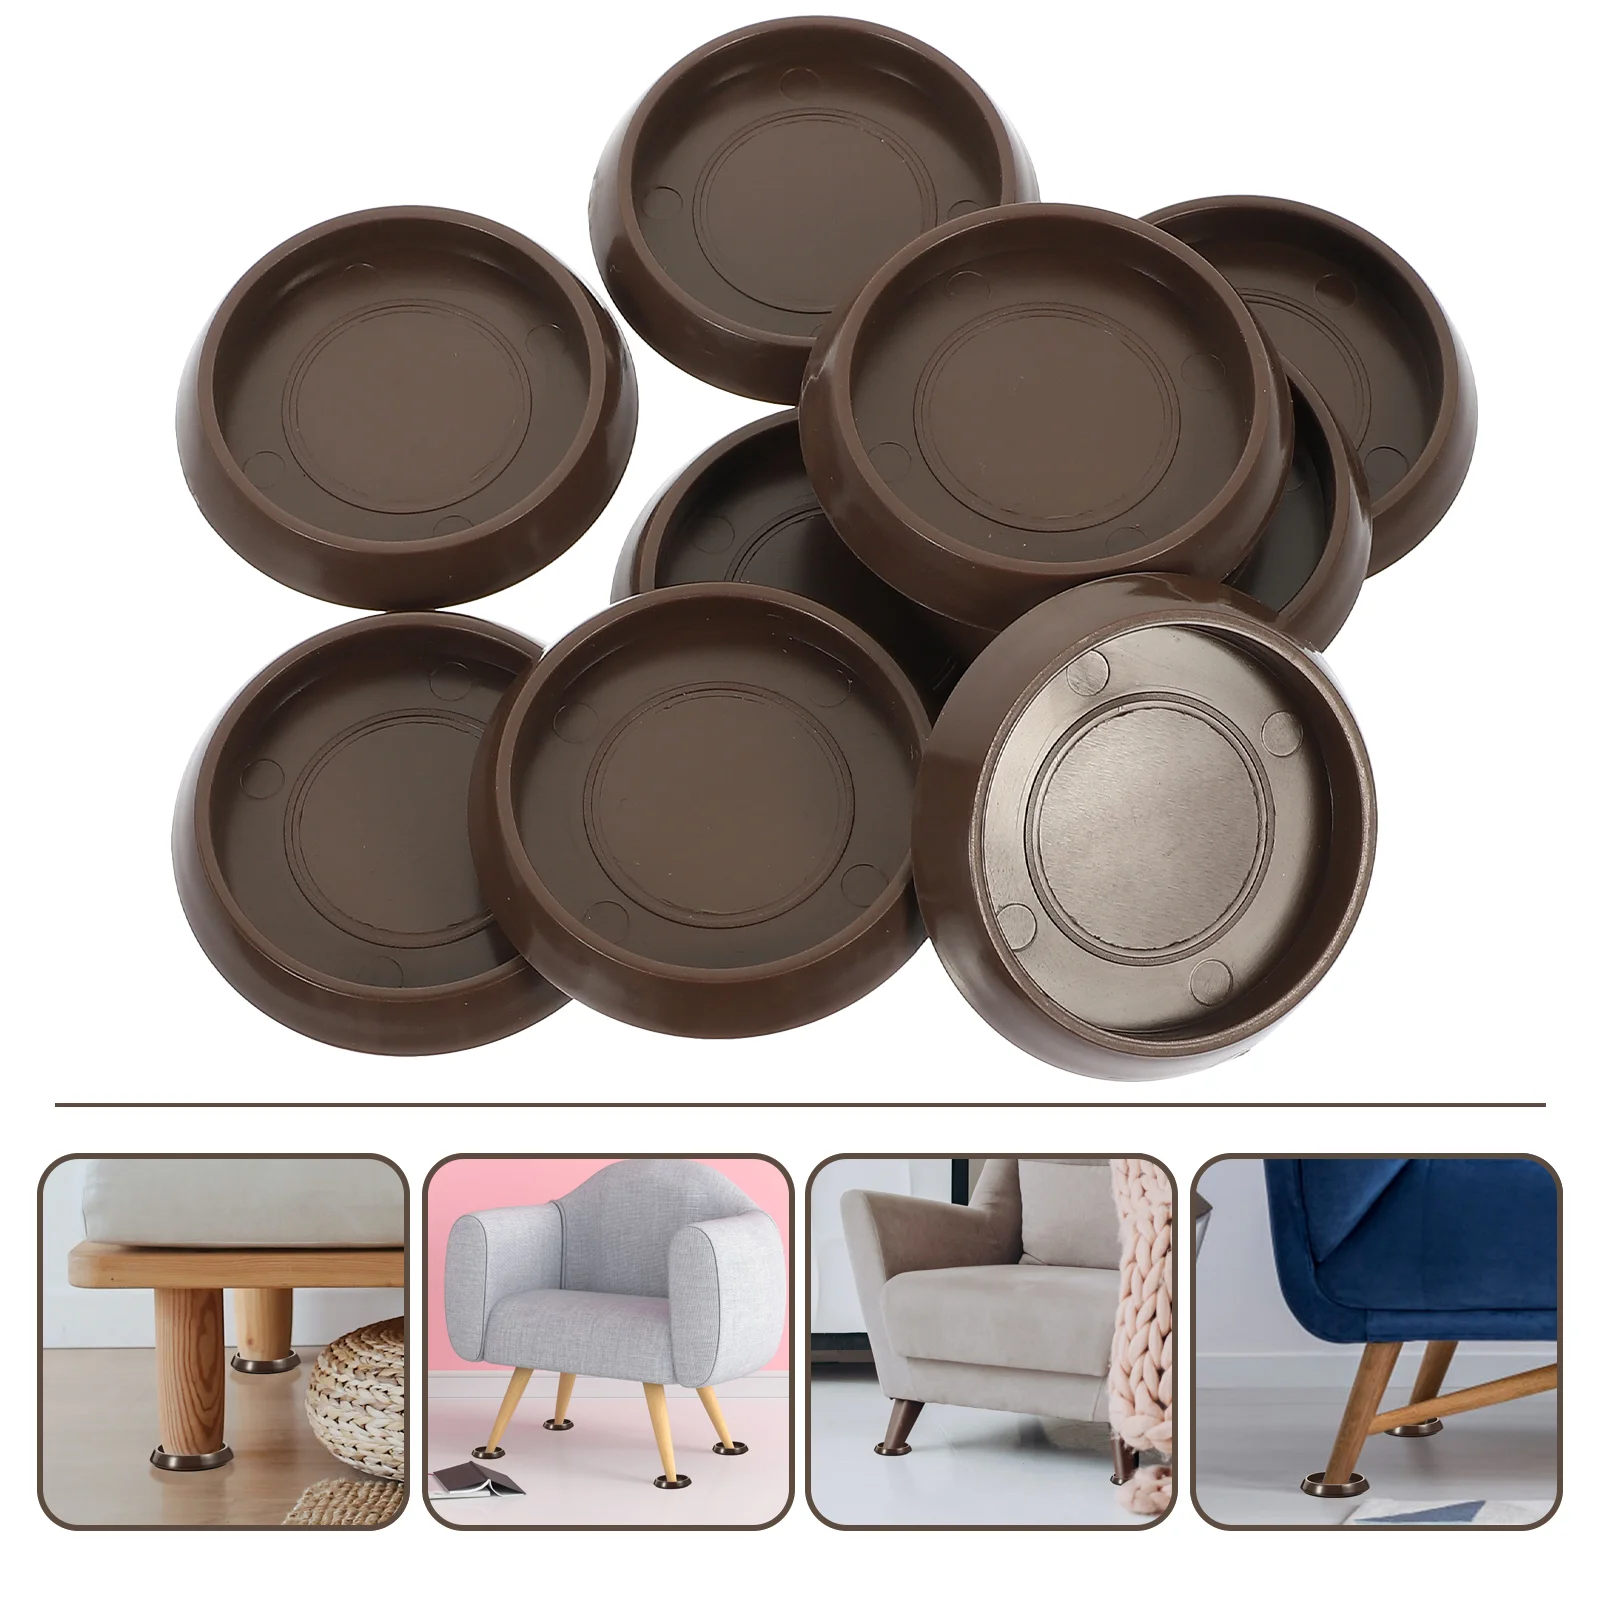 

10 Pcs Non Slip Furniture Pads Area Rug Round Bed Post Floor Protector Table Leg Cups Round Area Rug Bed Stop Chair Castor Cups